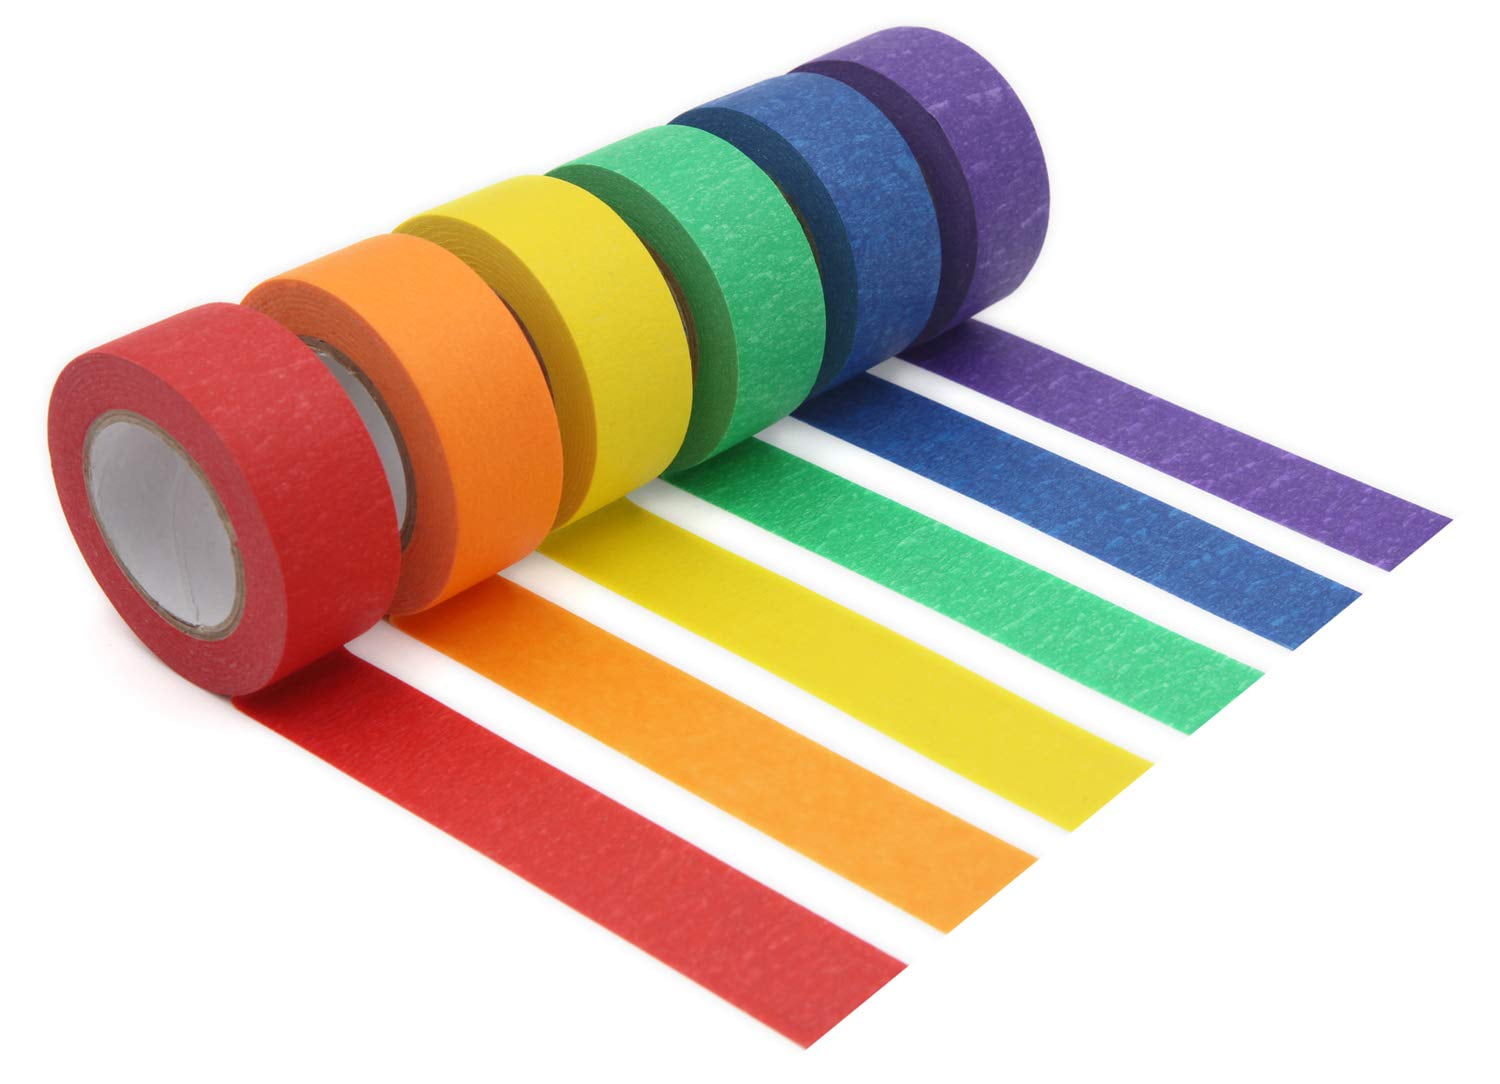 Colorations Masking Tape, 1/2 inch - 8 Colors 169692